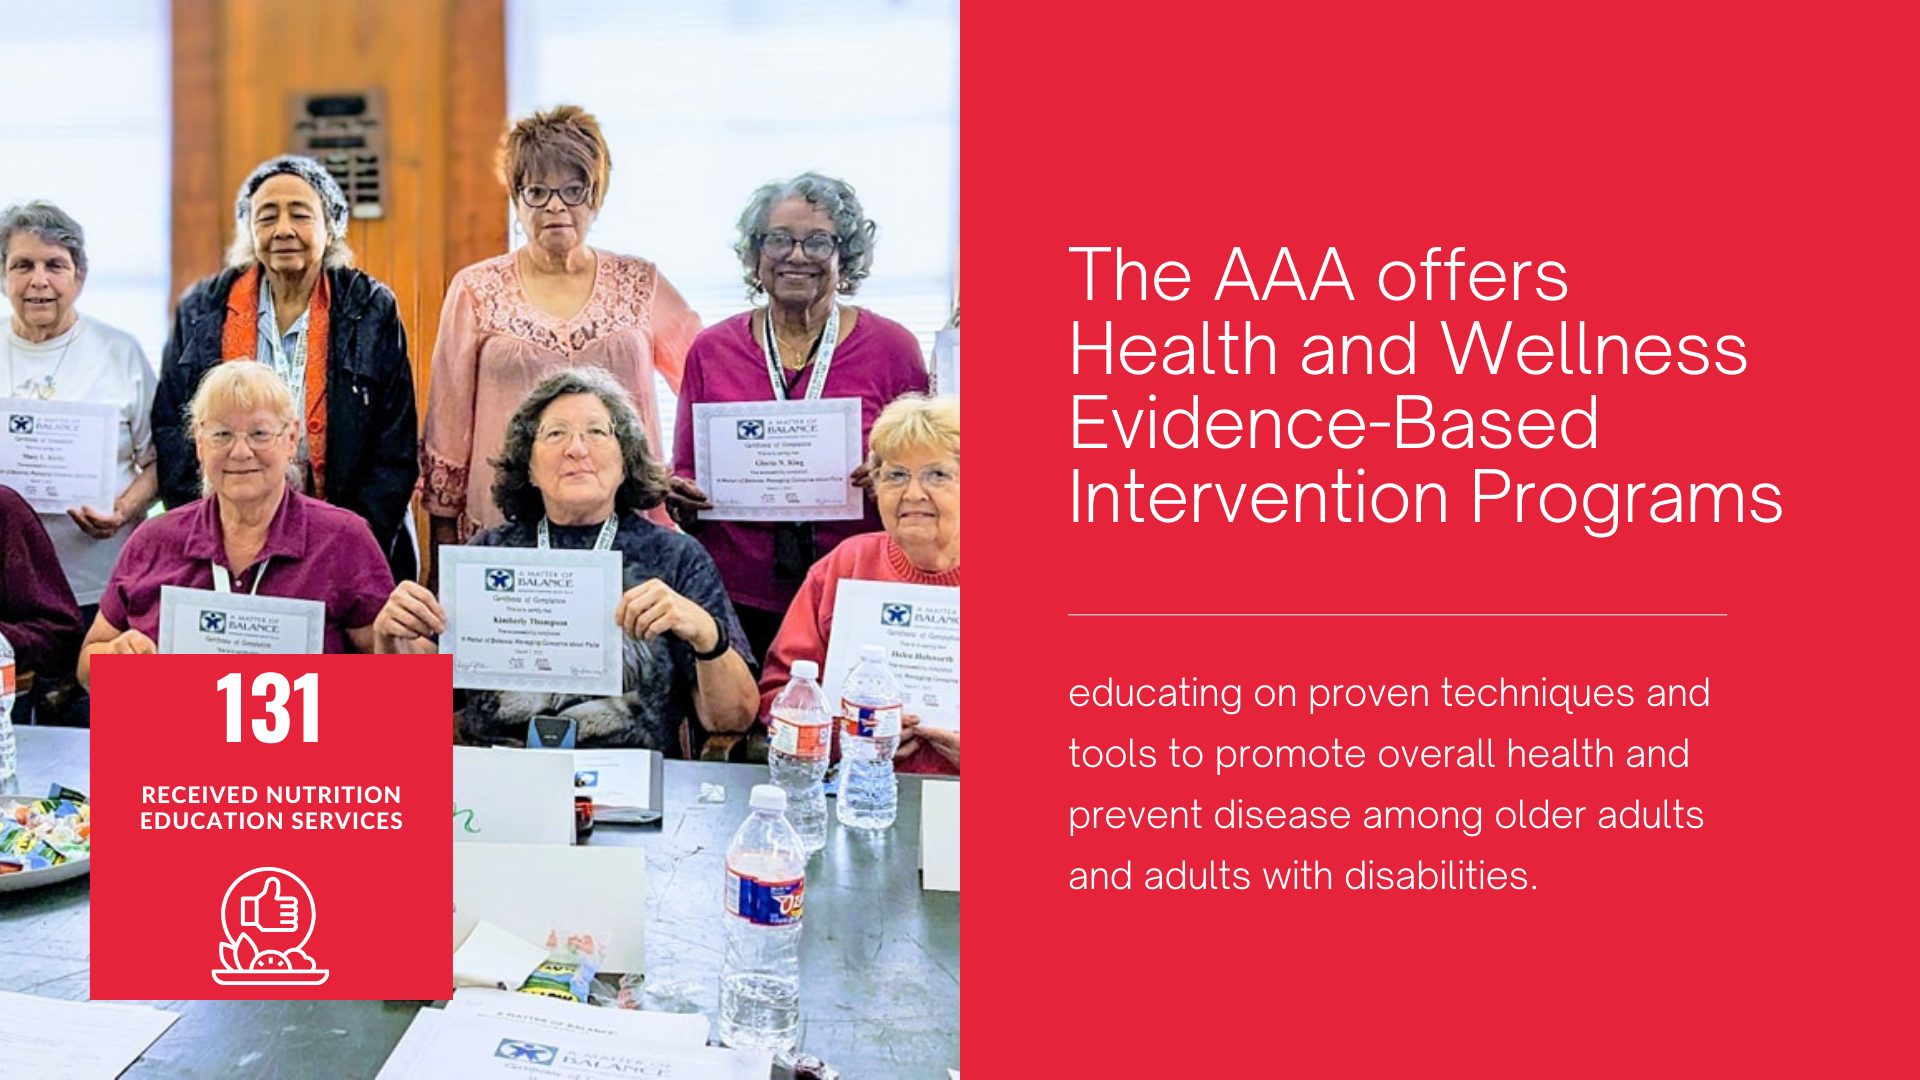 The aaa offers health and wellness evidence based intervention programs.